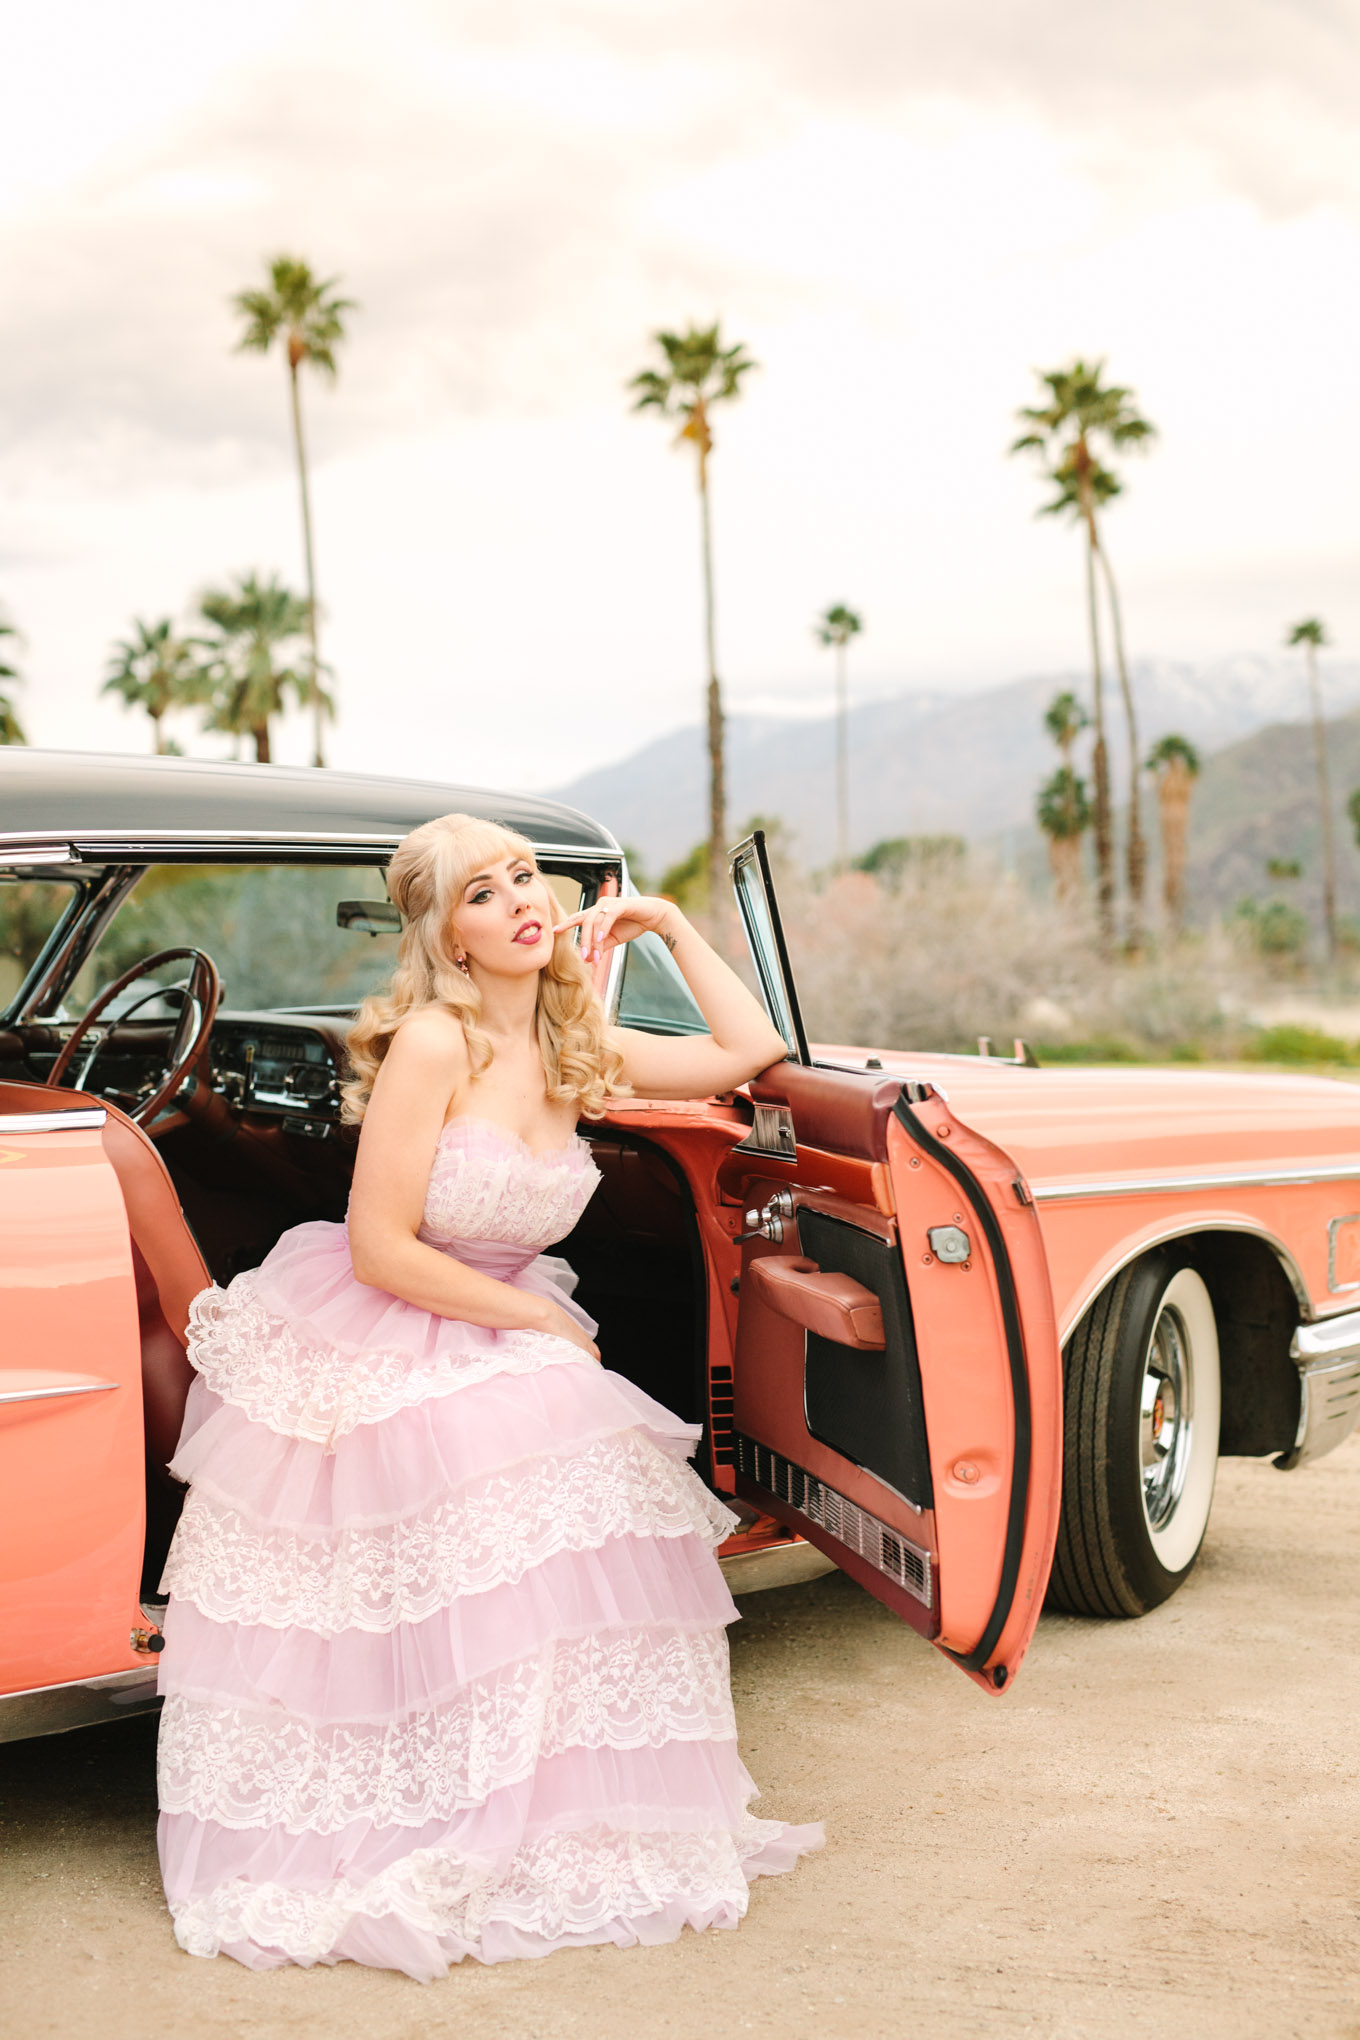 Bride sitting in classic car. Modern vintage-inspired Palm Springs engagement session with a 1960s pink Cadillac, retro clothing, and flowers by Shindig Chic. | Colorful and elevated wedding inspiration for fun-loving couples in Southern California | #engagementsession #PalmSpringsengagement #vintageweddingdress #floralcar #pinkcar   Source: Mary Costa Photography | Los Angeles